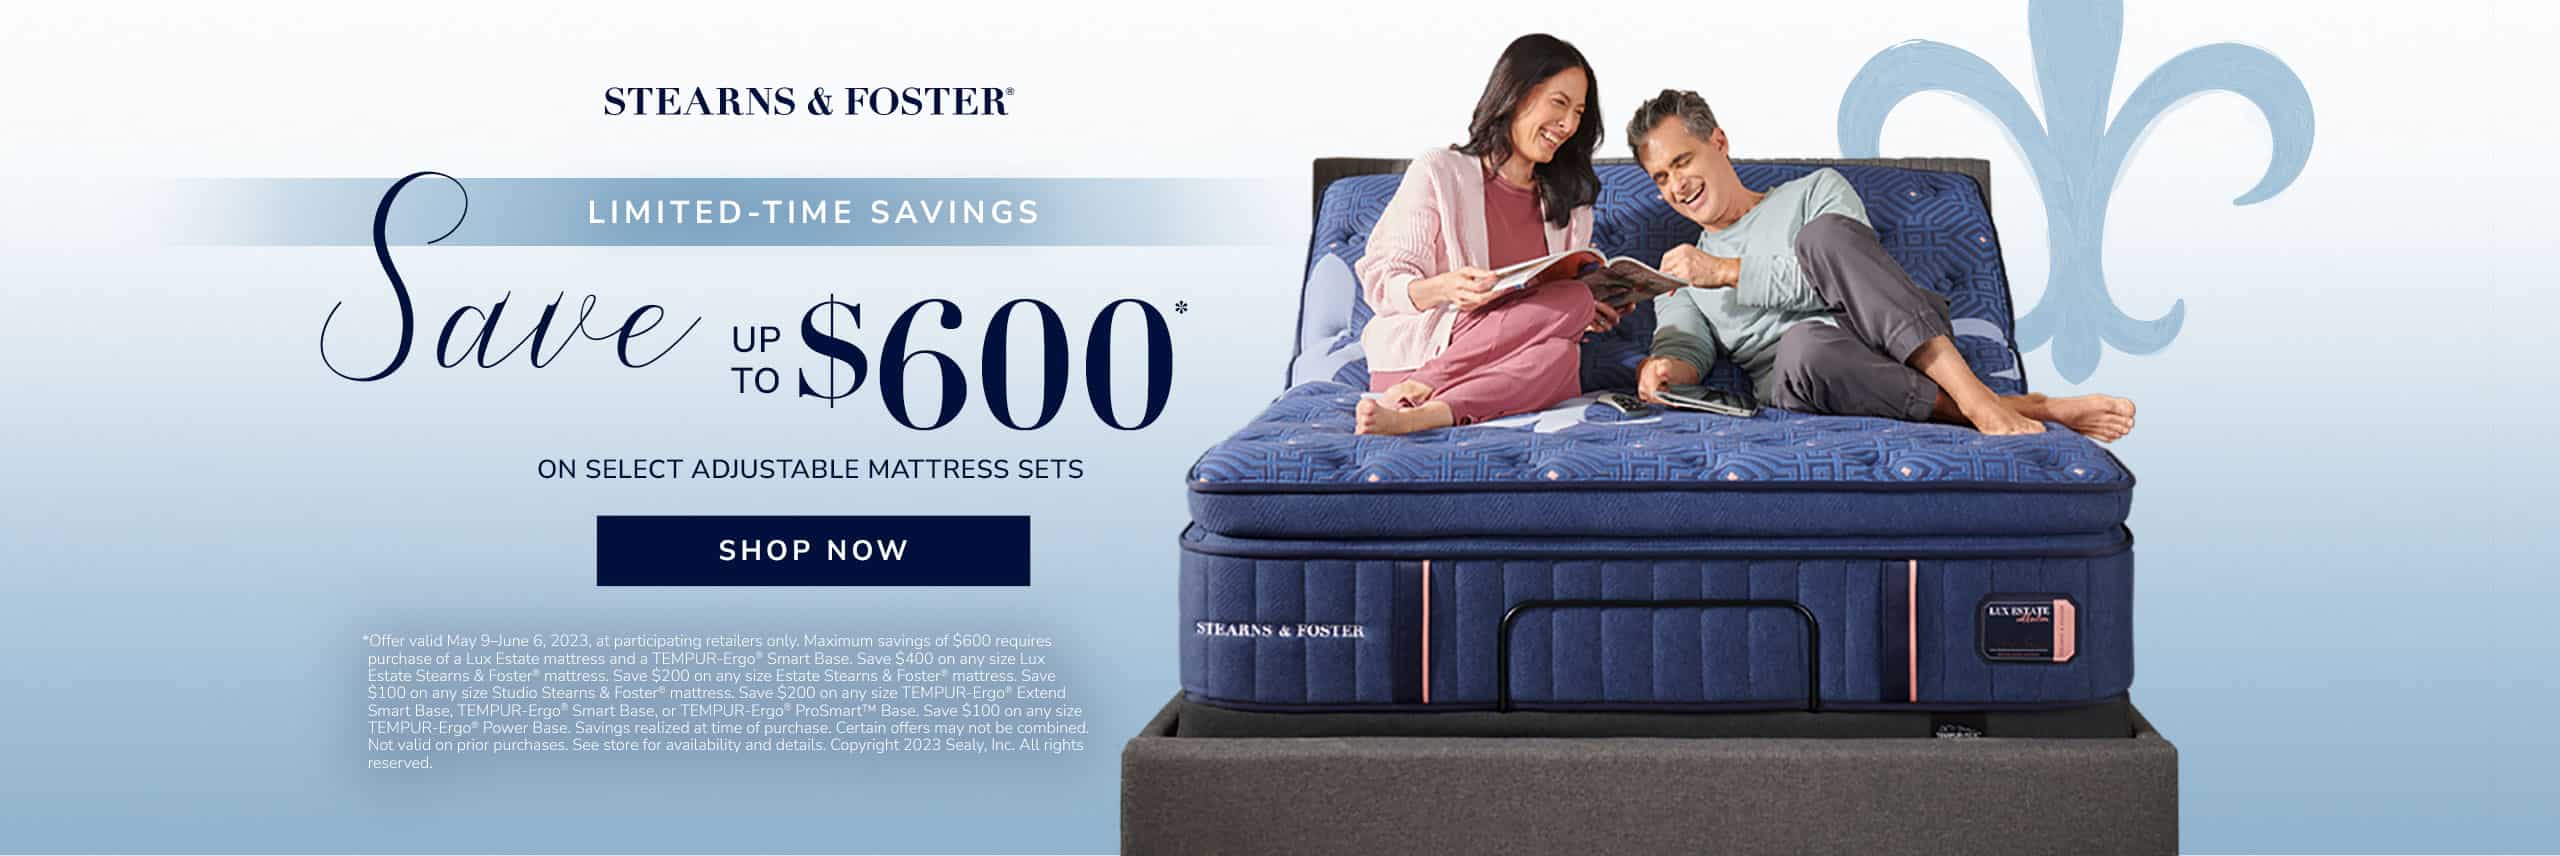 Stearns & Foster Save up to $600